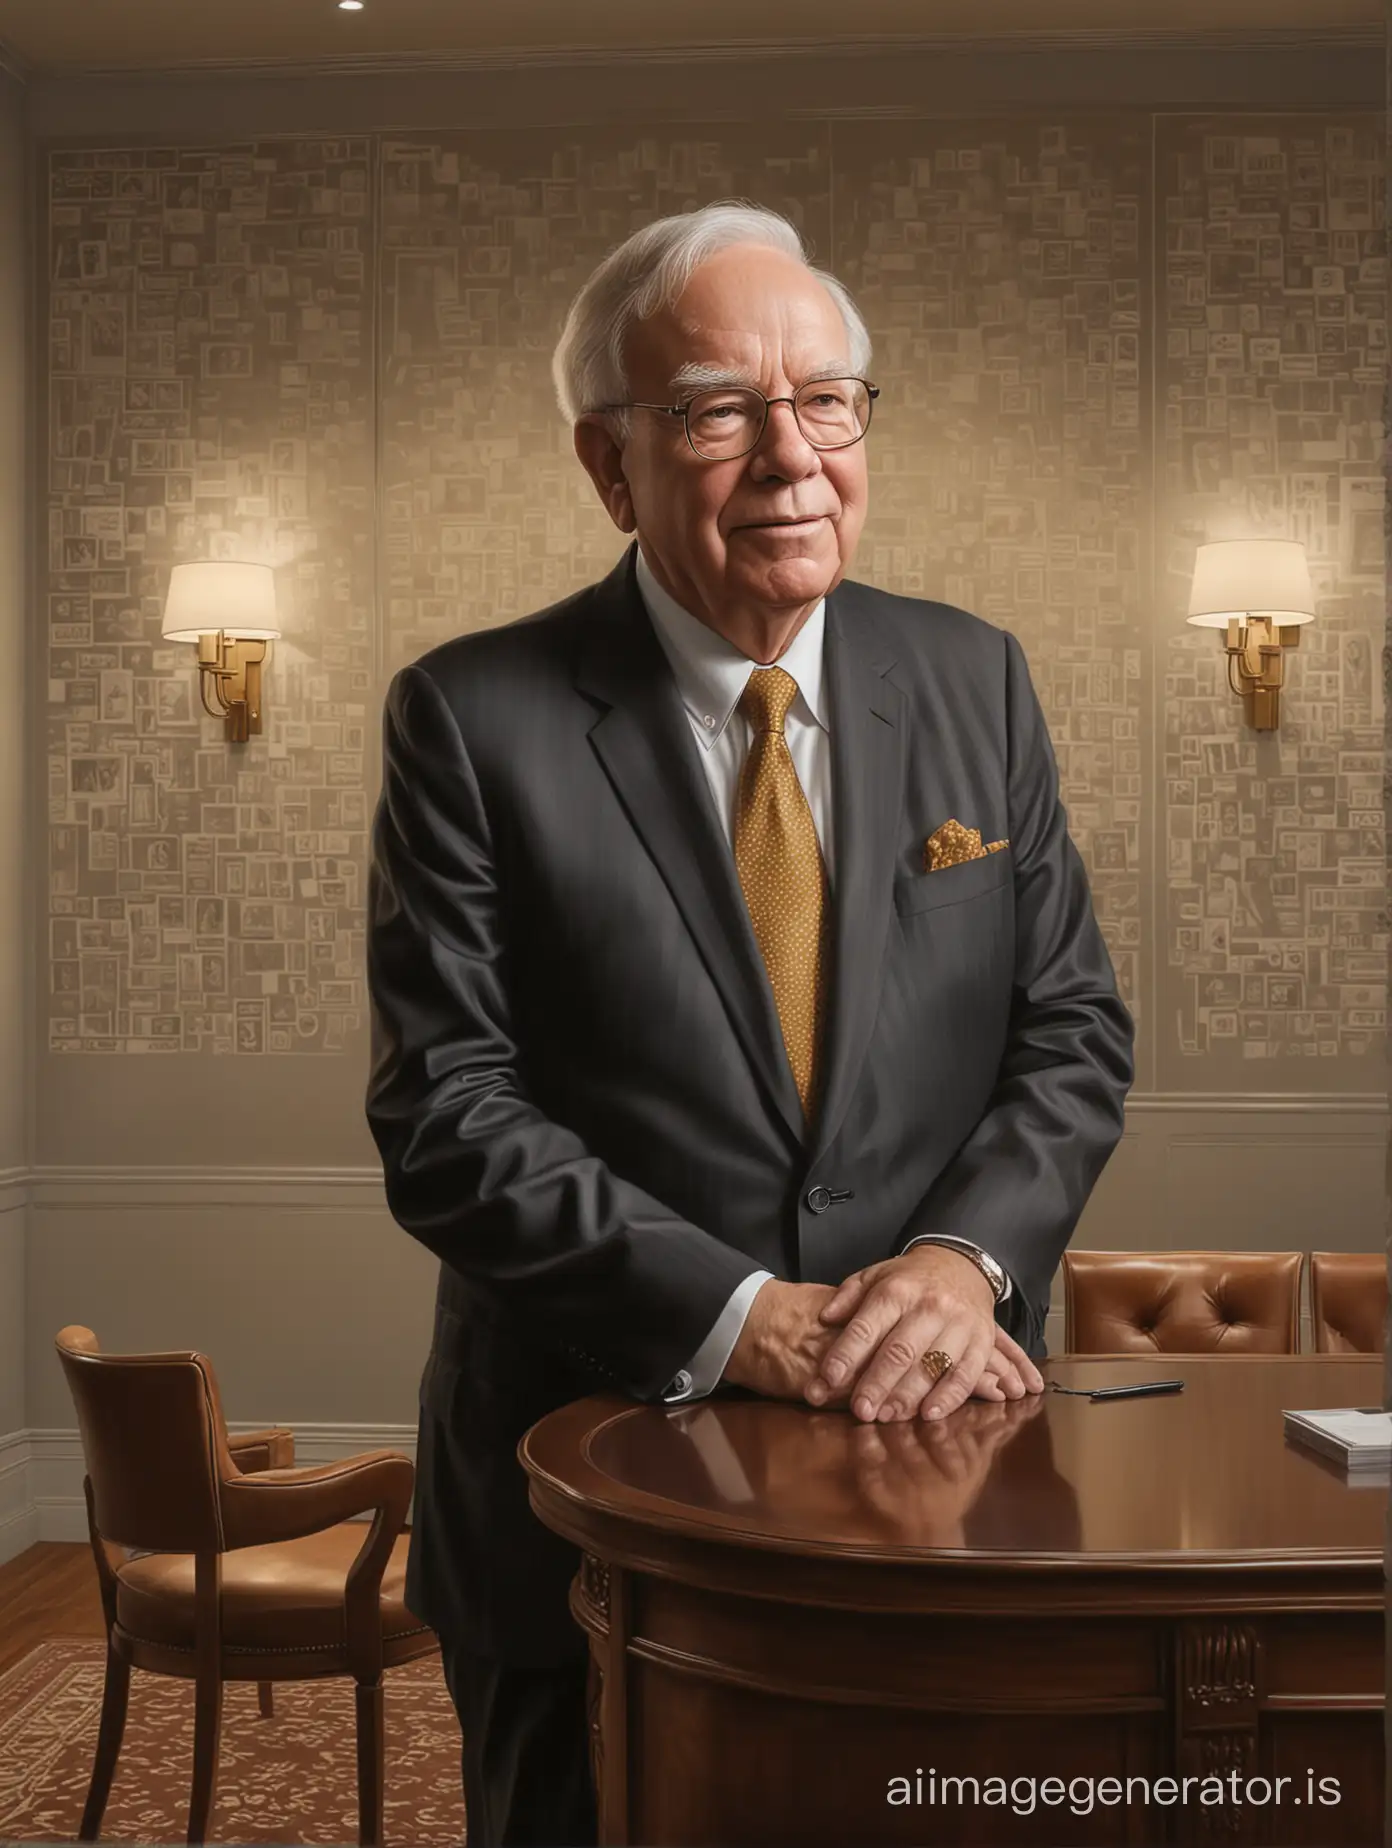 A highly realistic mural capturing Warren buffet in an elegant, dimly lit study, in mid-conversation, with the ambiance of the room reflecting a sense of future possibilities, hyper realistic, ultra realistic details, full body, standing